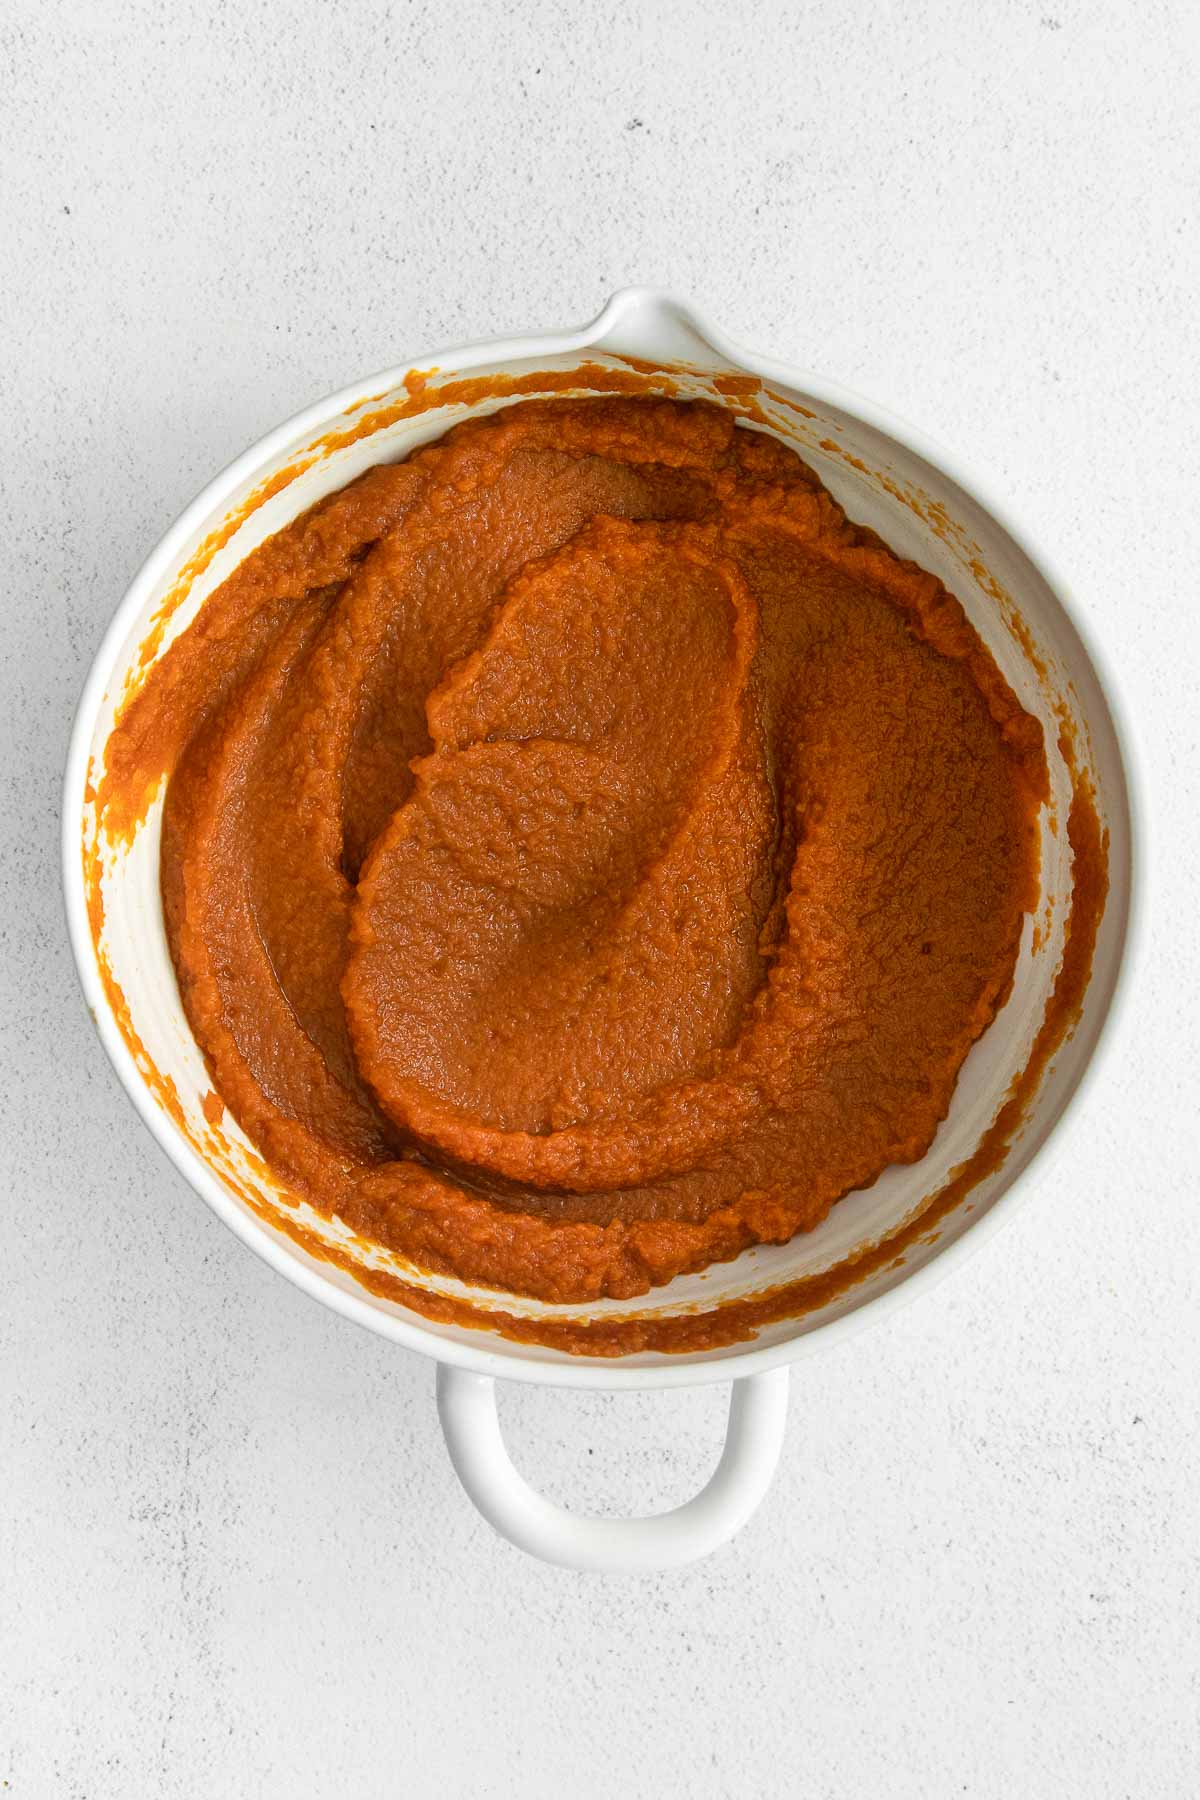 pumpkin puree mixture in a white mixing bowl.